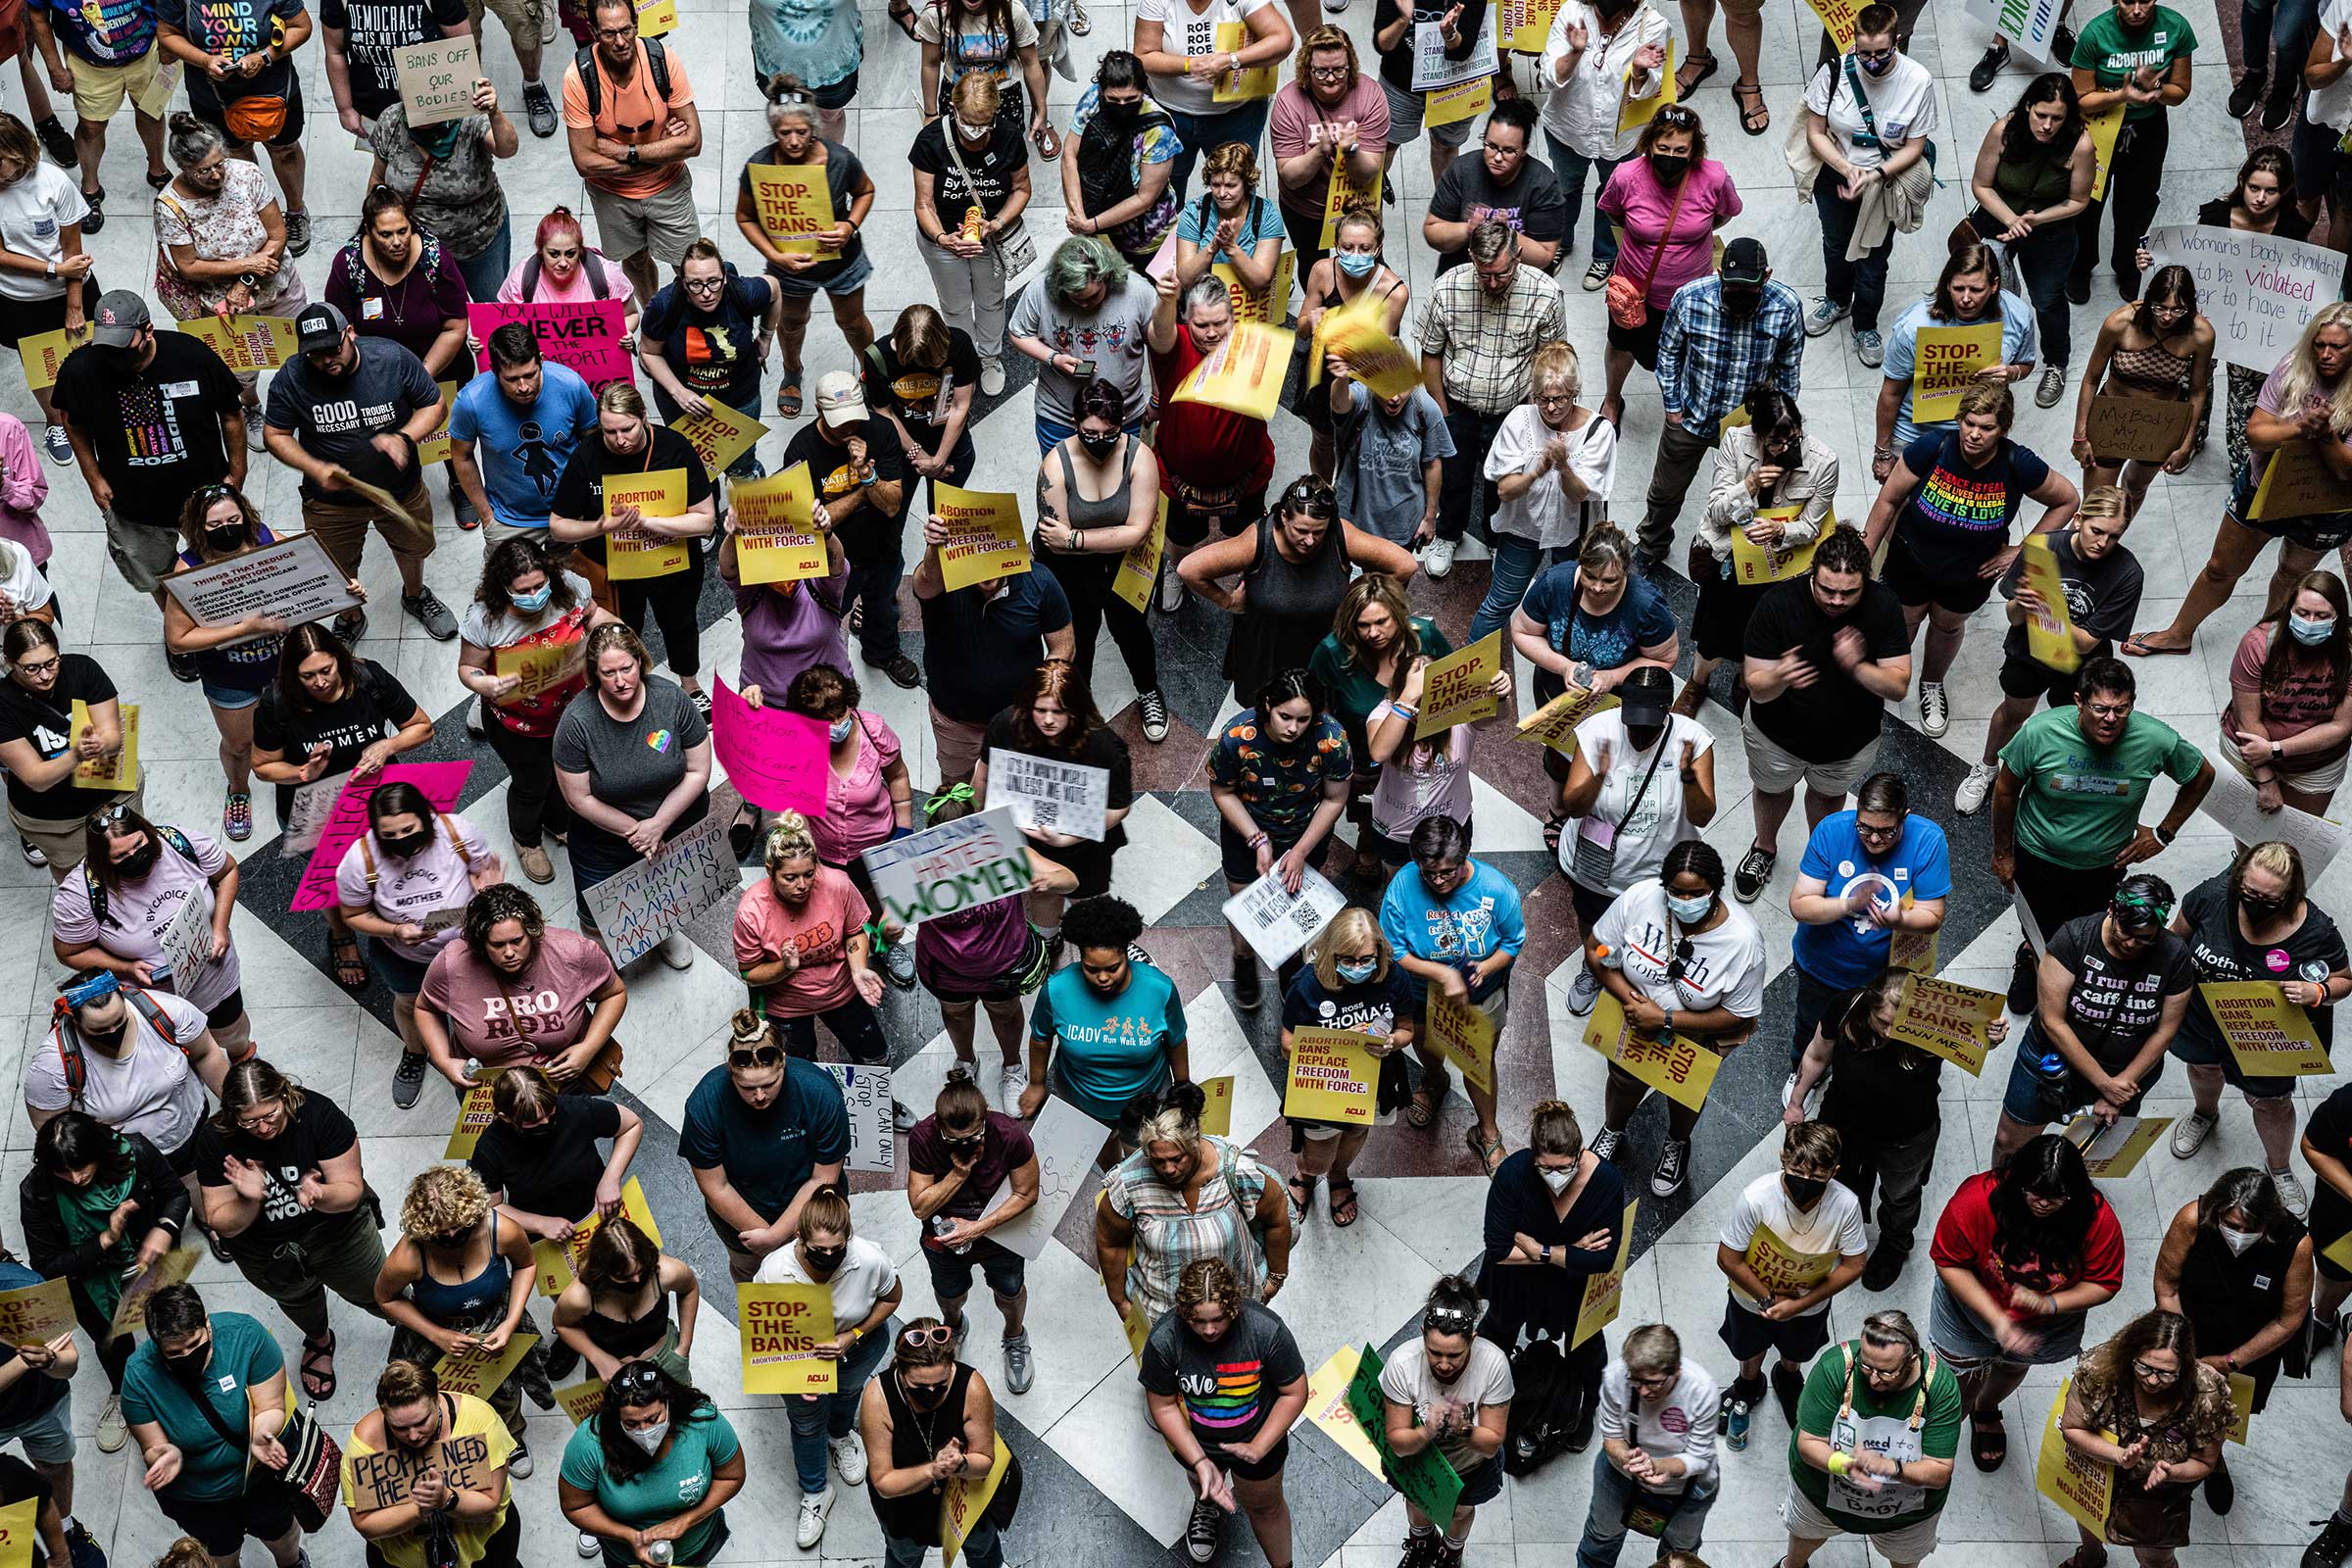 A crowd of anti-abortion and abortion rights protesters are seen in the Indiana State Capitol building on July 25, 2022 in Indianapolis, Indiana. (Jon Cherry—Getty Images)